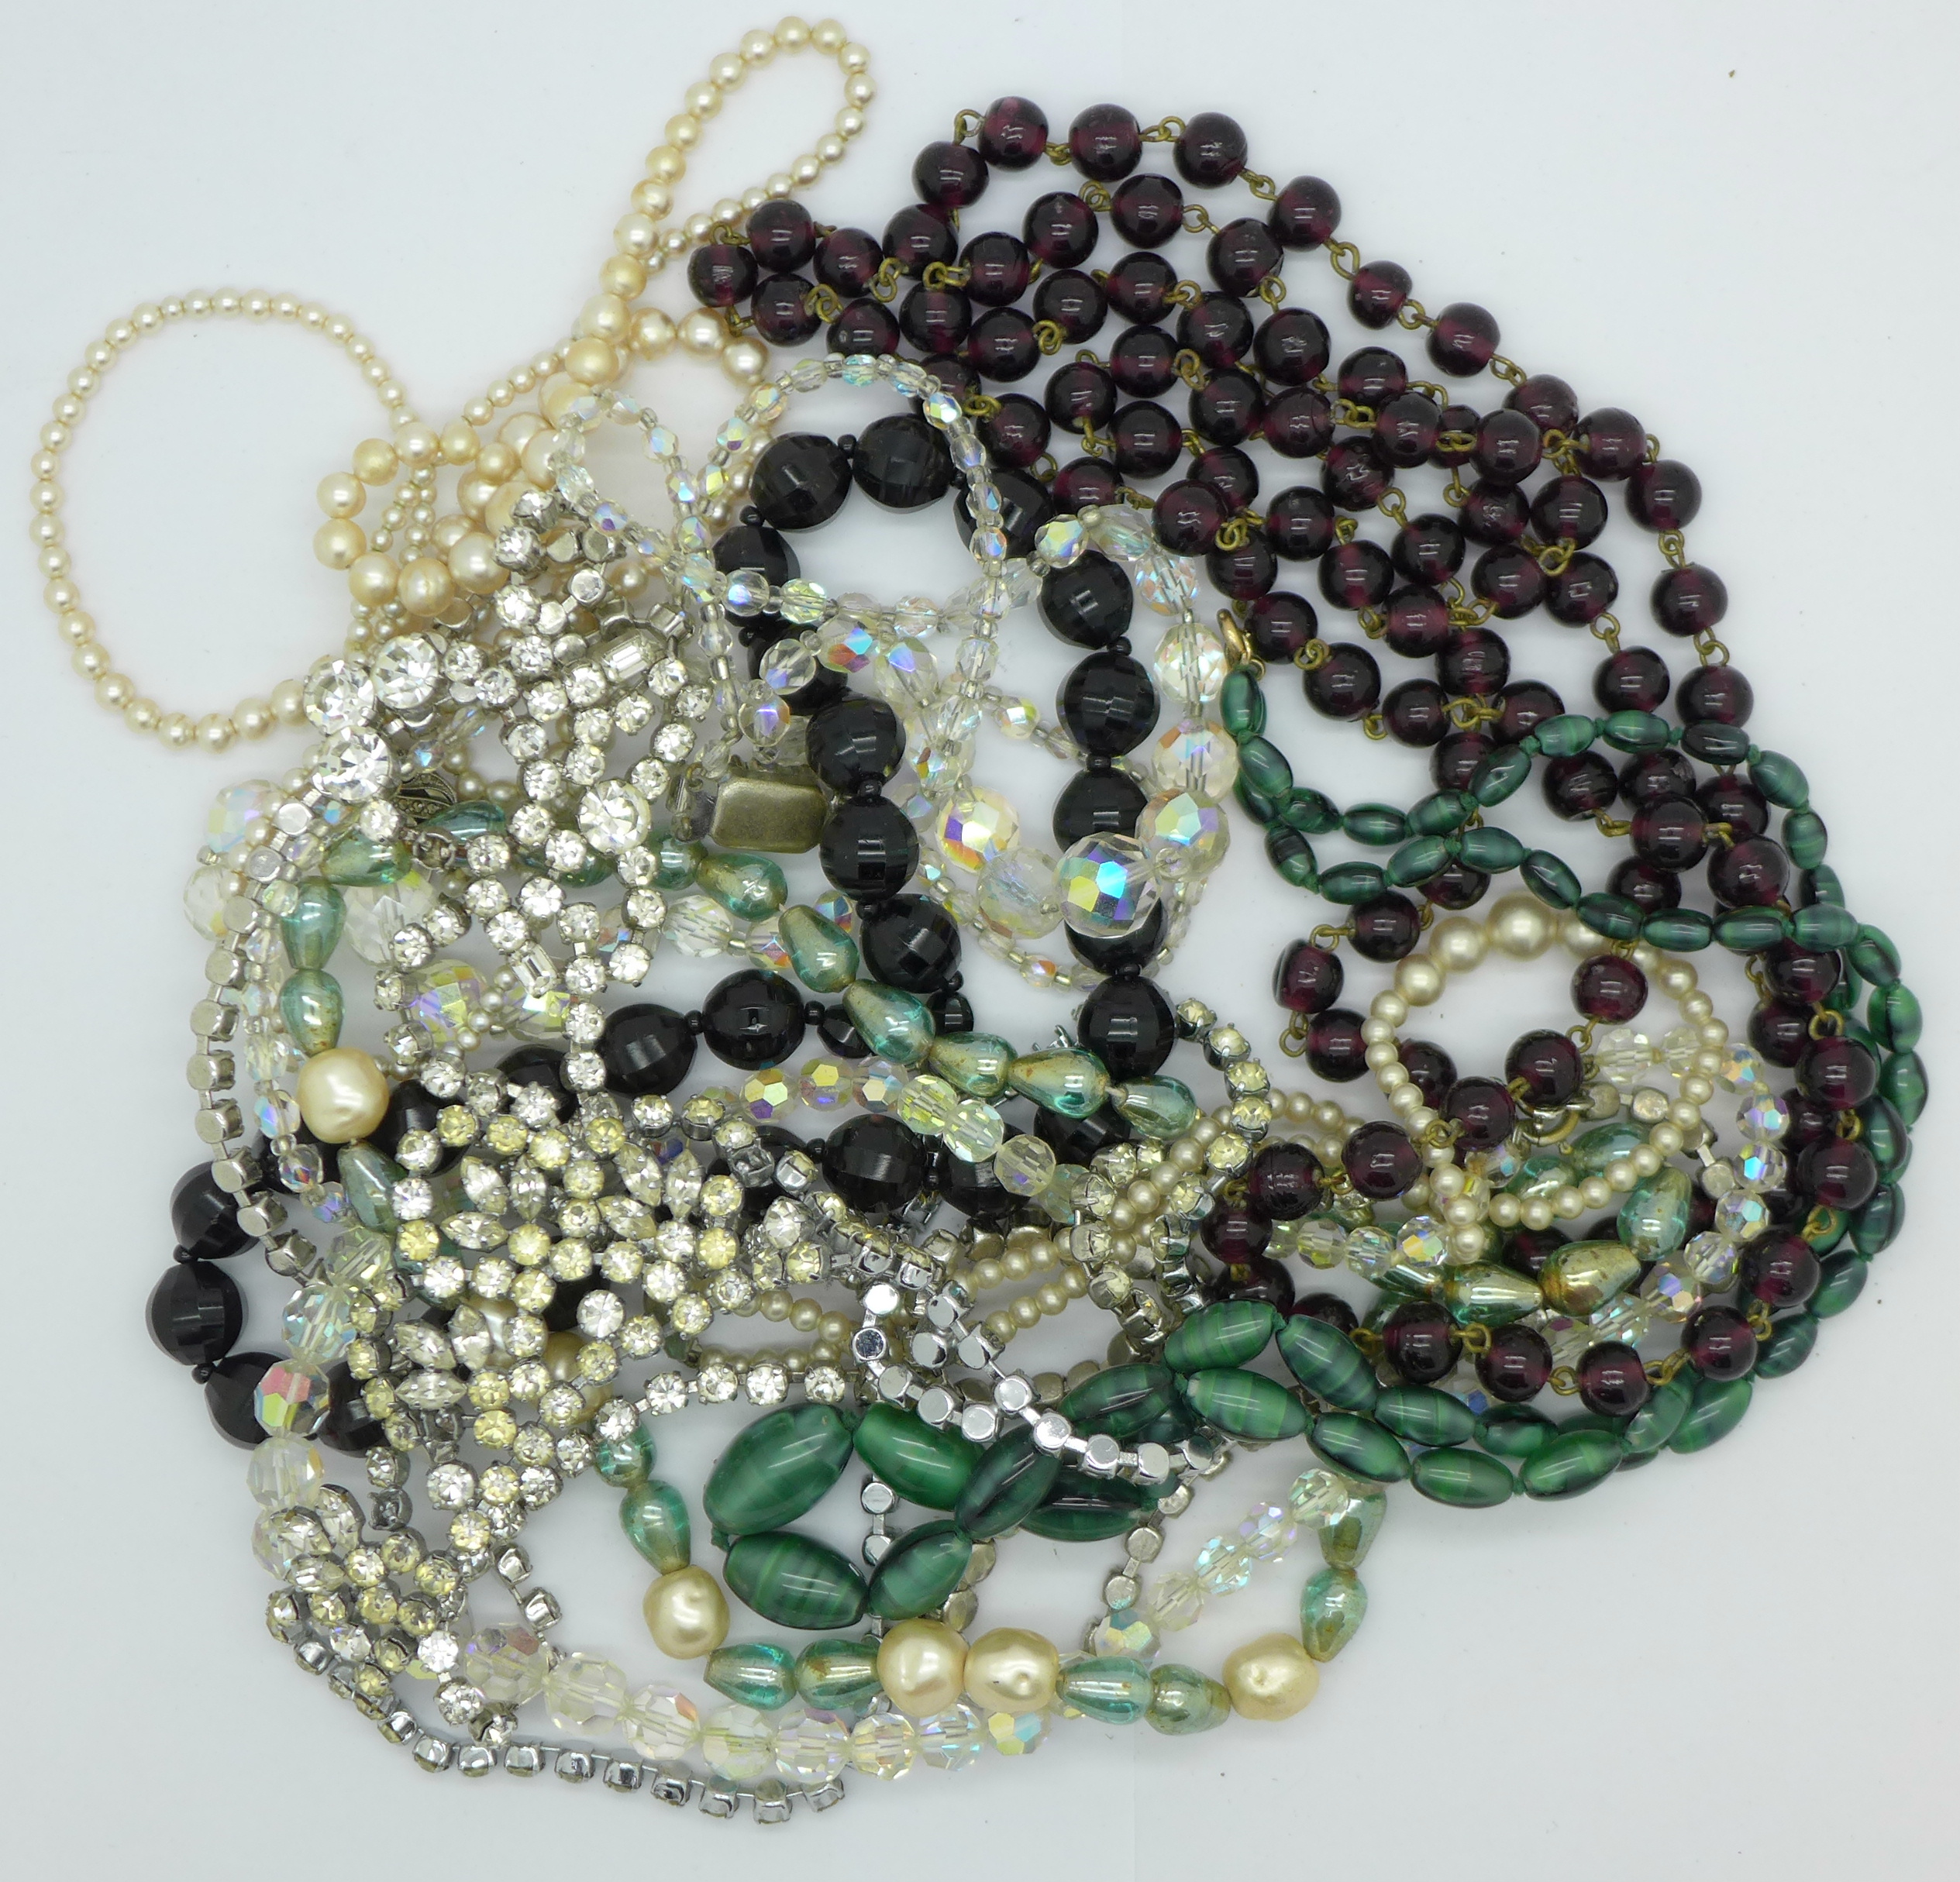 Necklaces including a faux pearl necklace with silver clasp